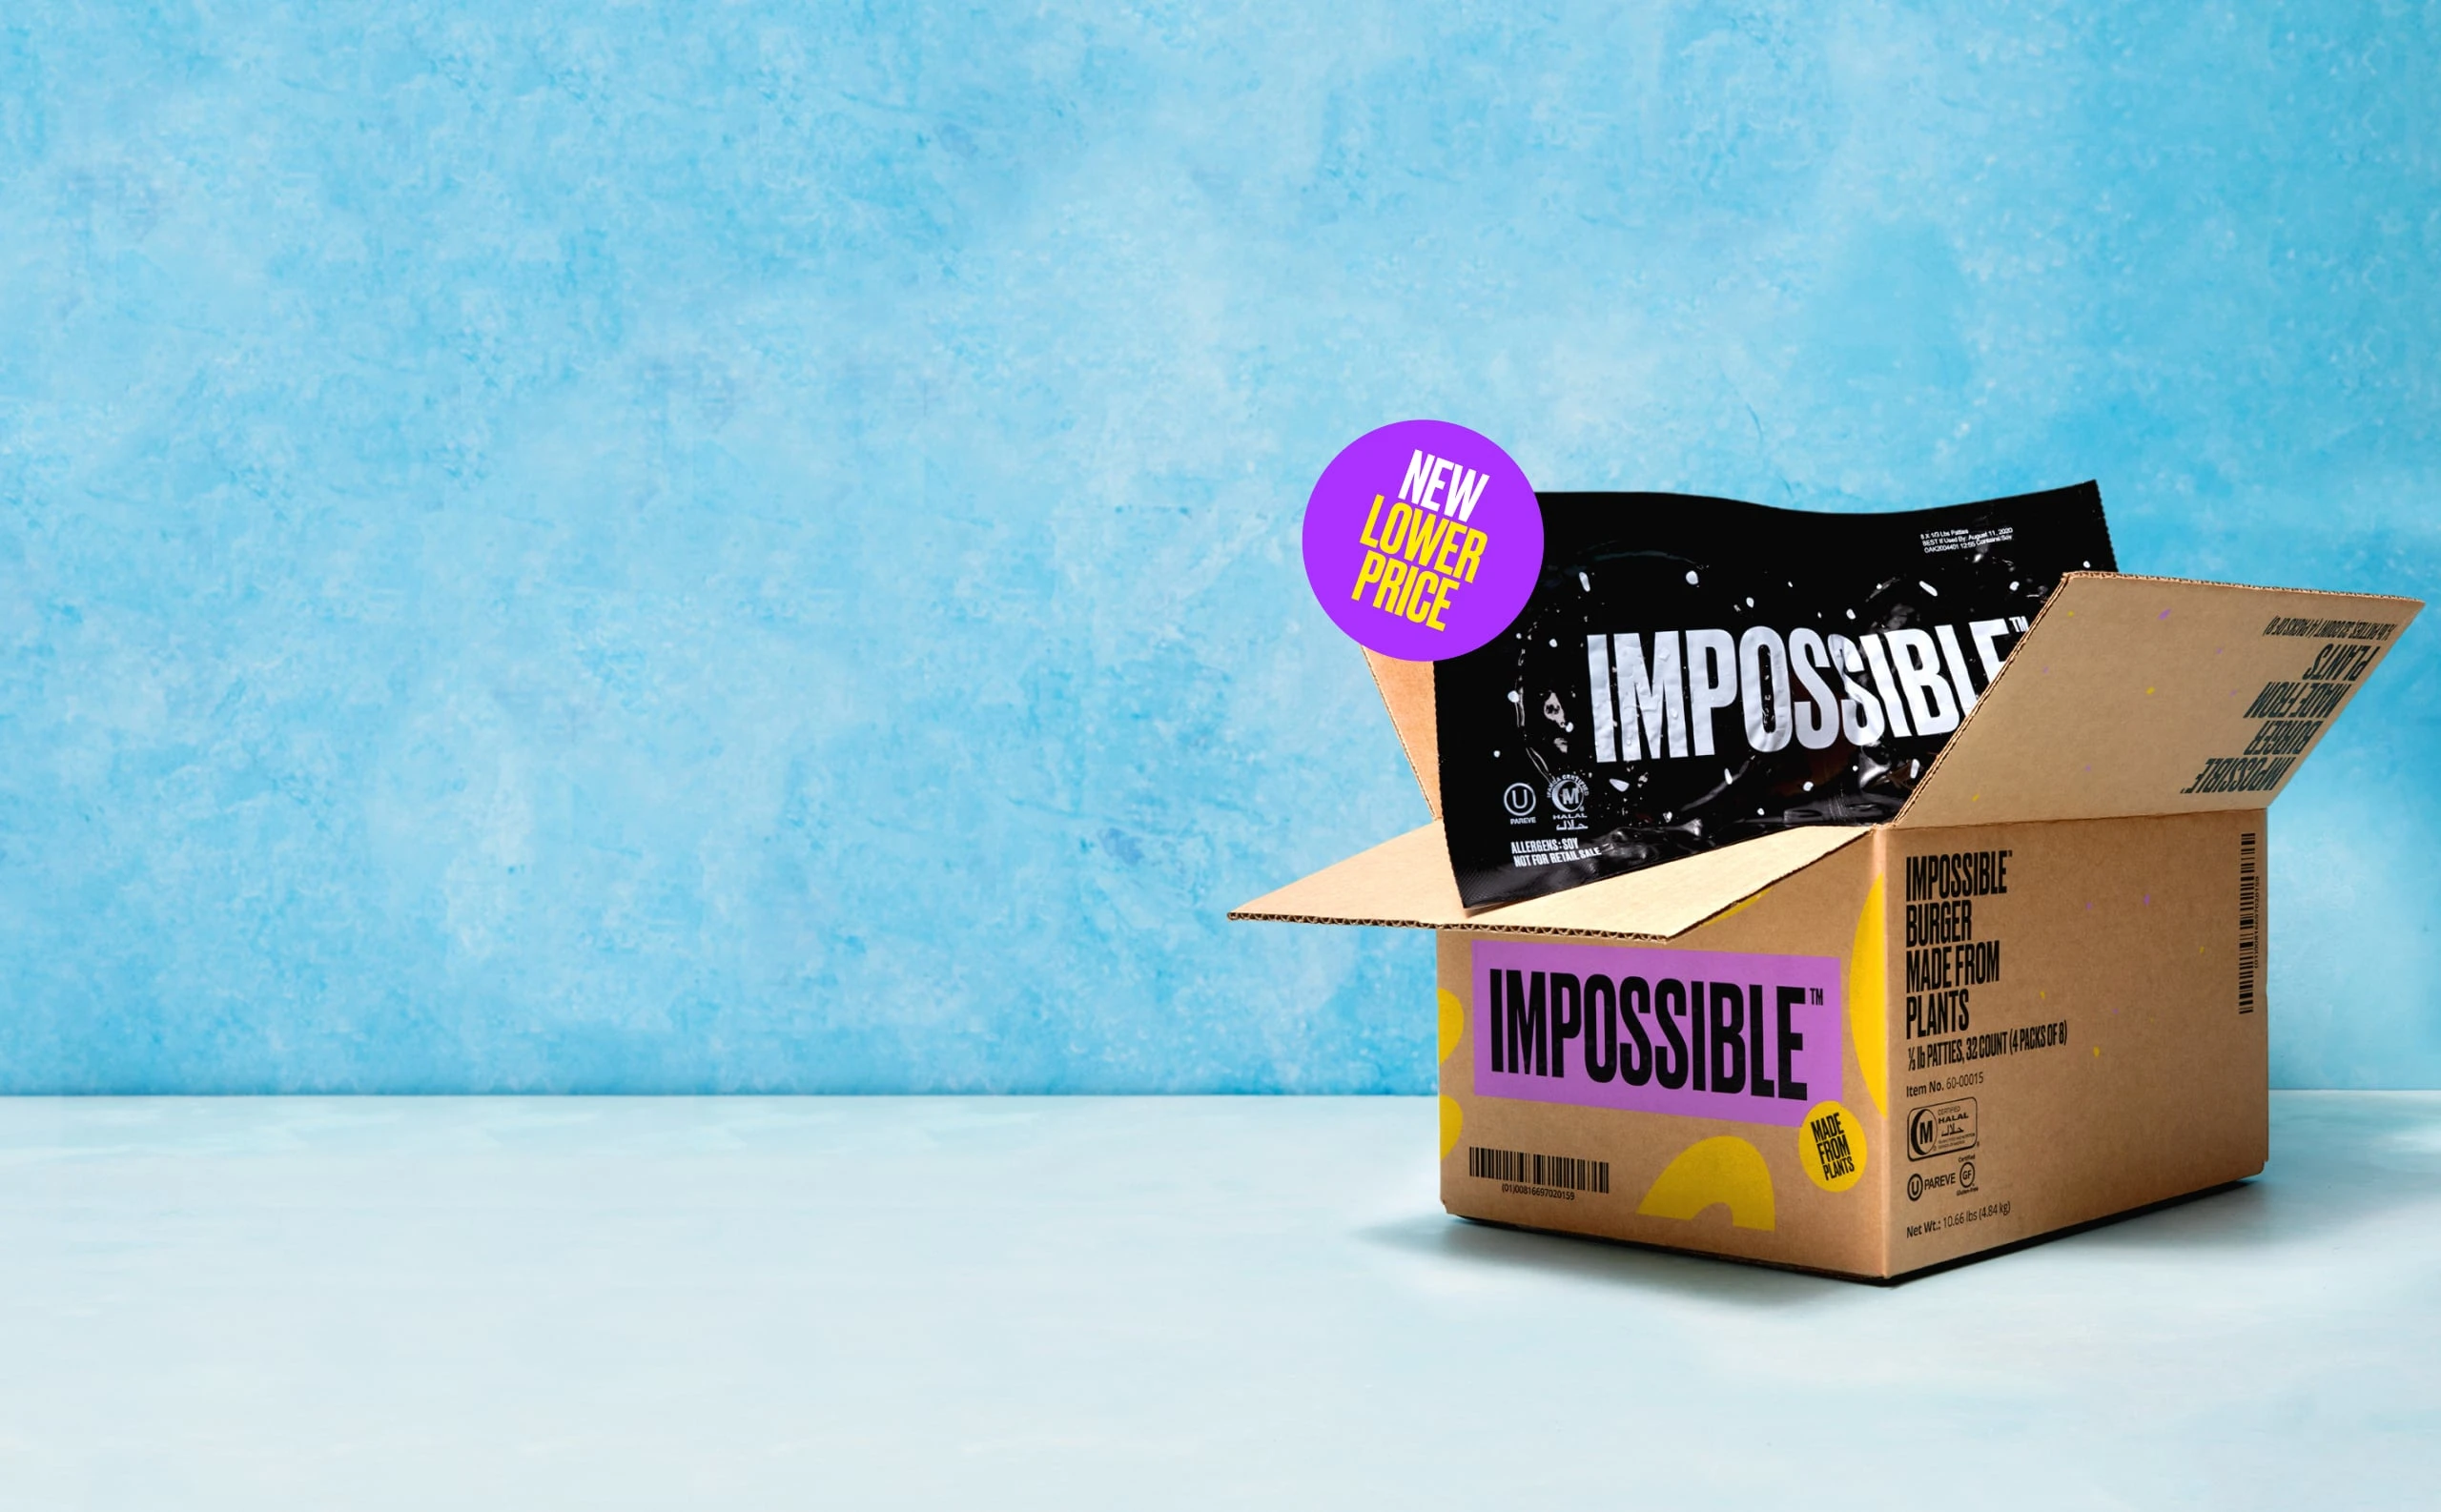 Impossible Burger packaged in Impossible branded box with new lower price sticker